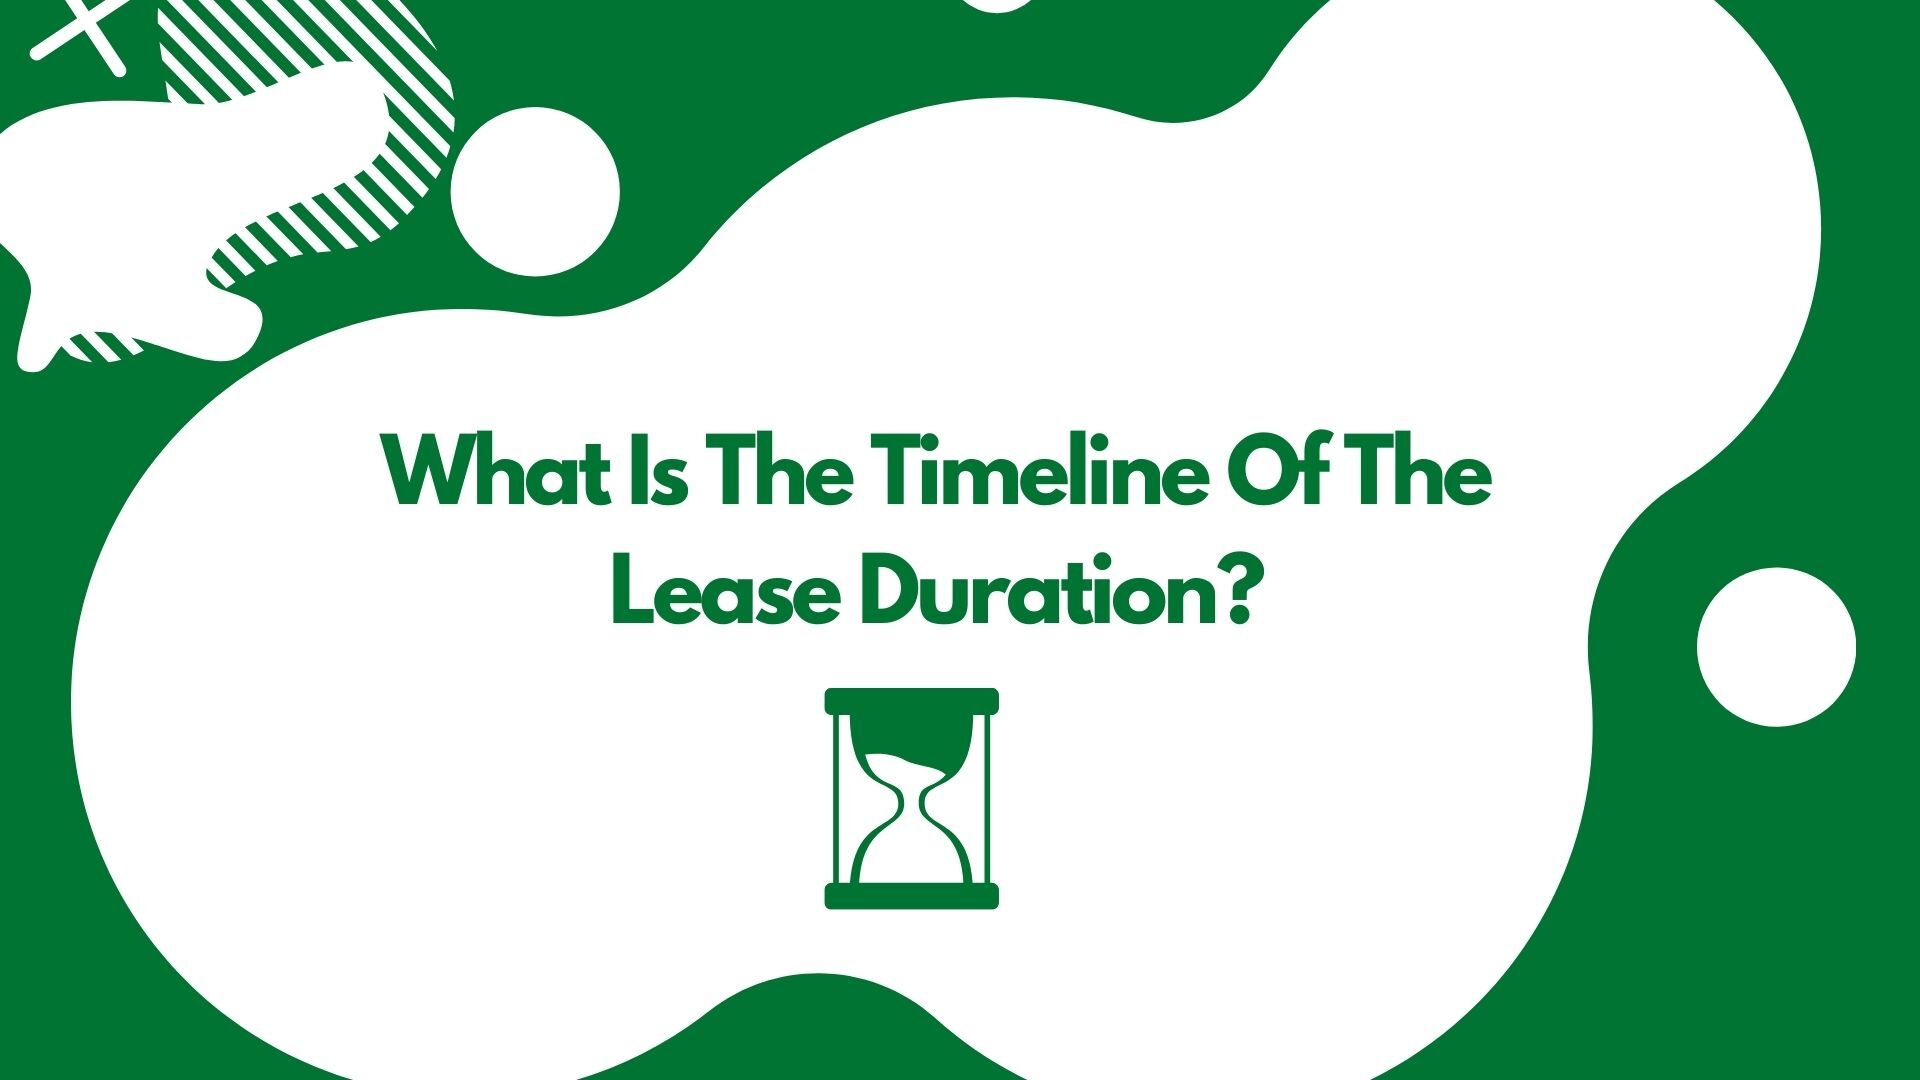 What is the timeline and lease duration.